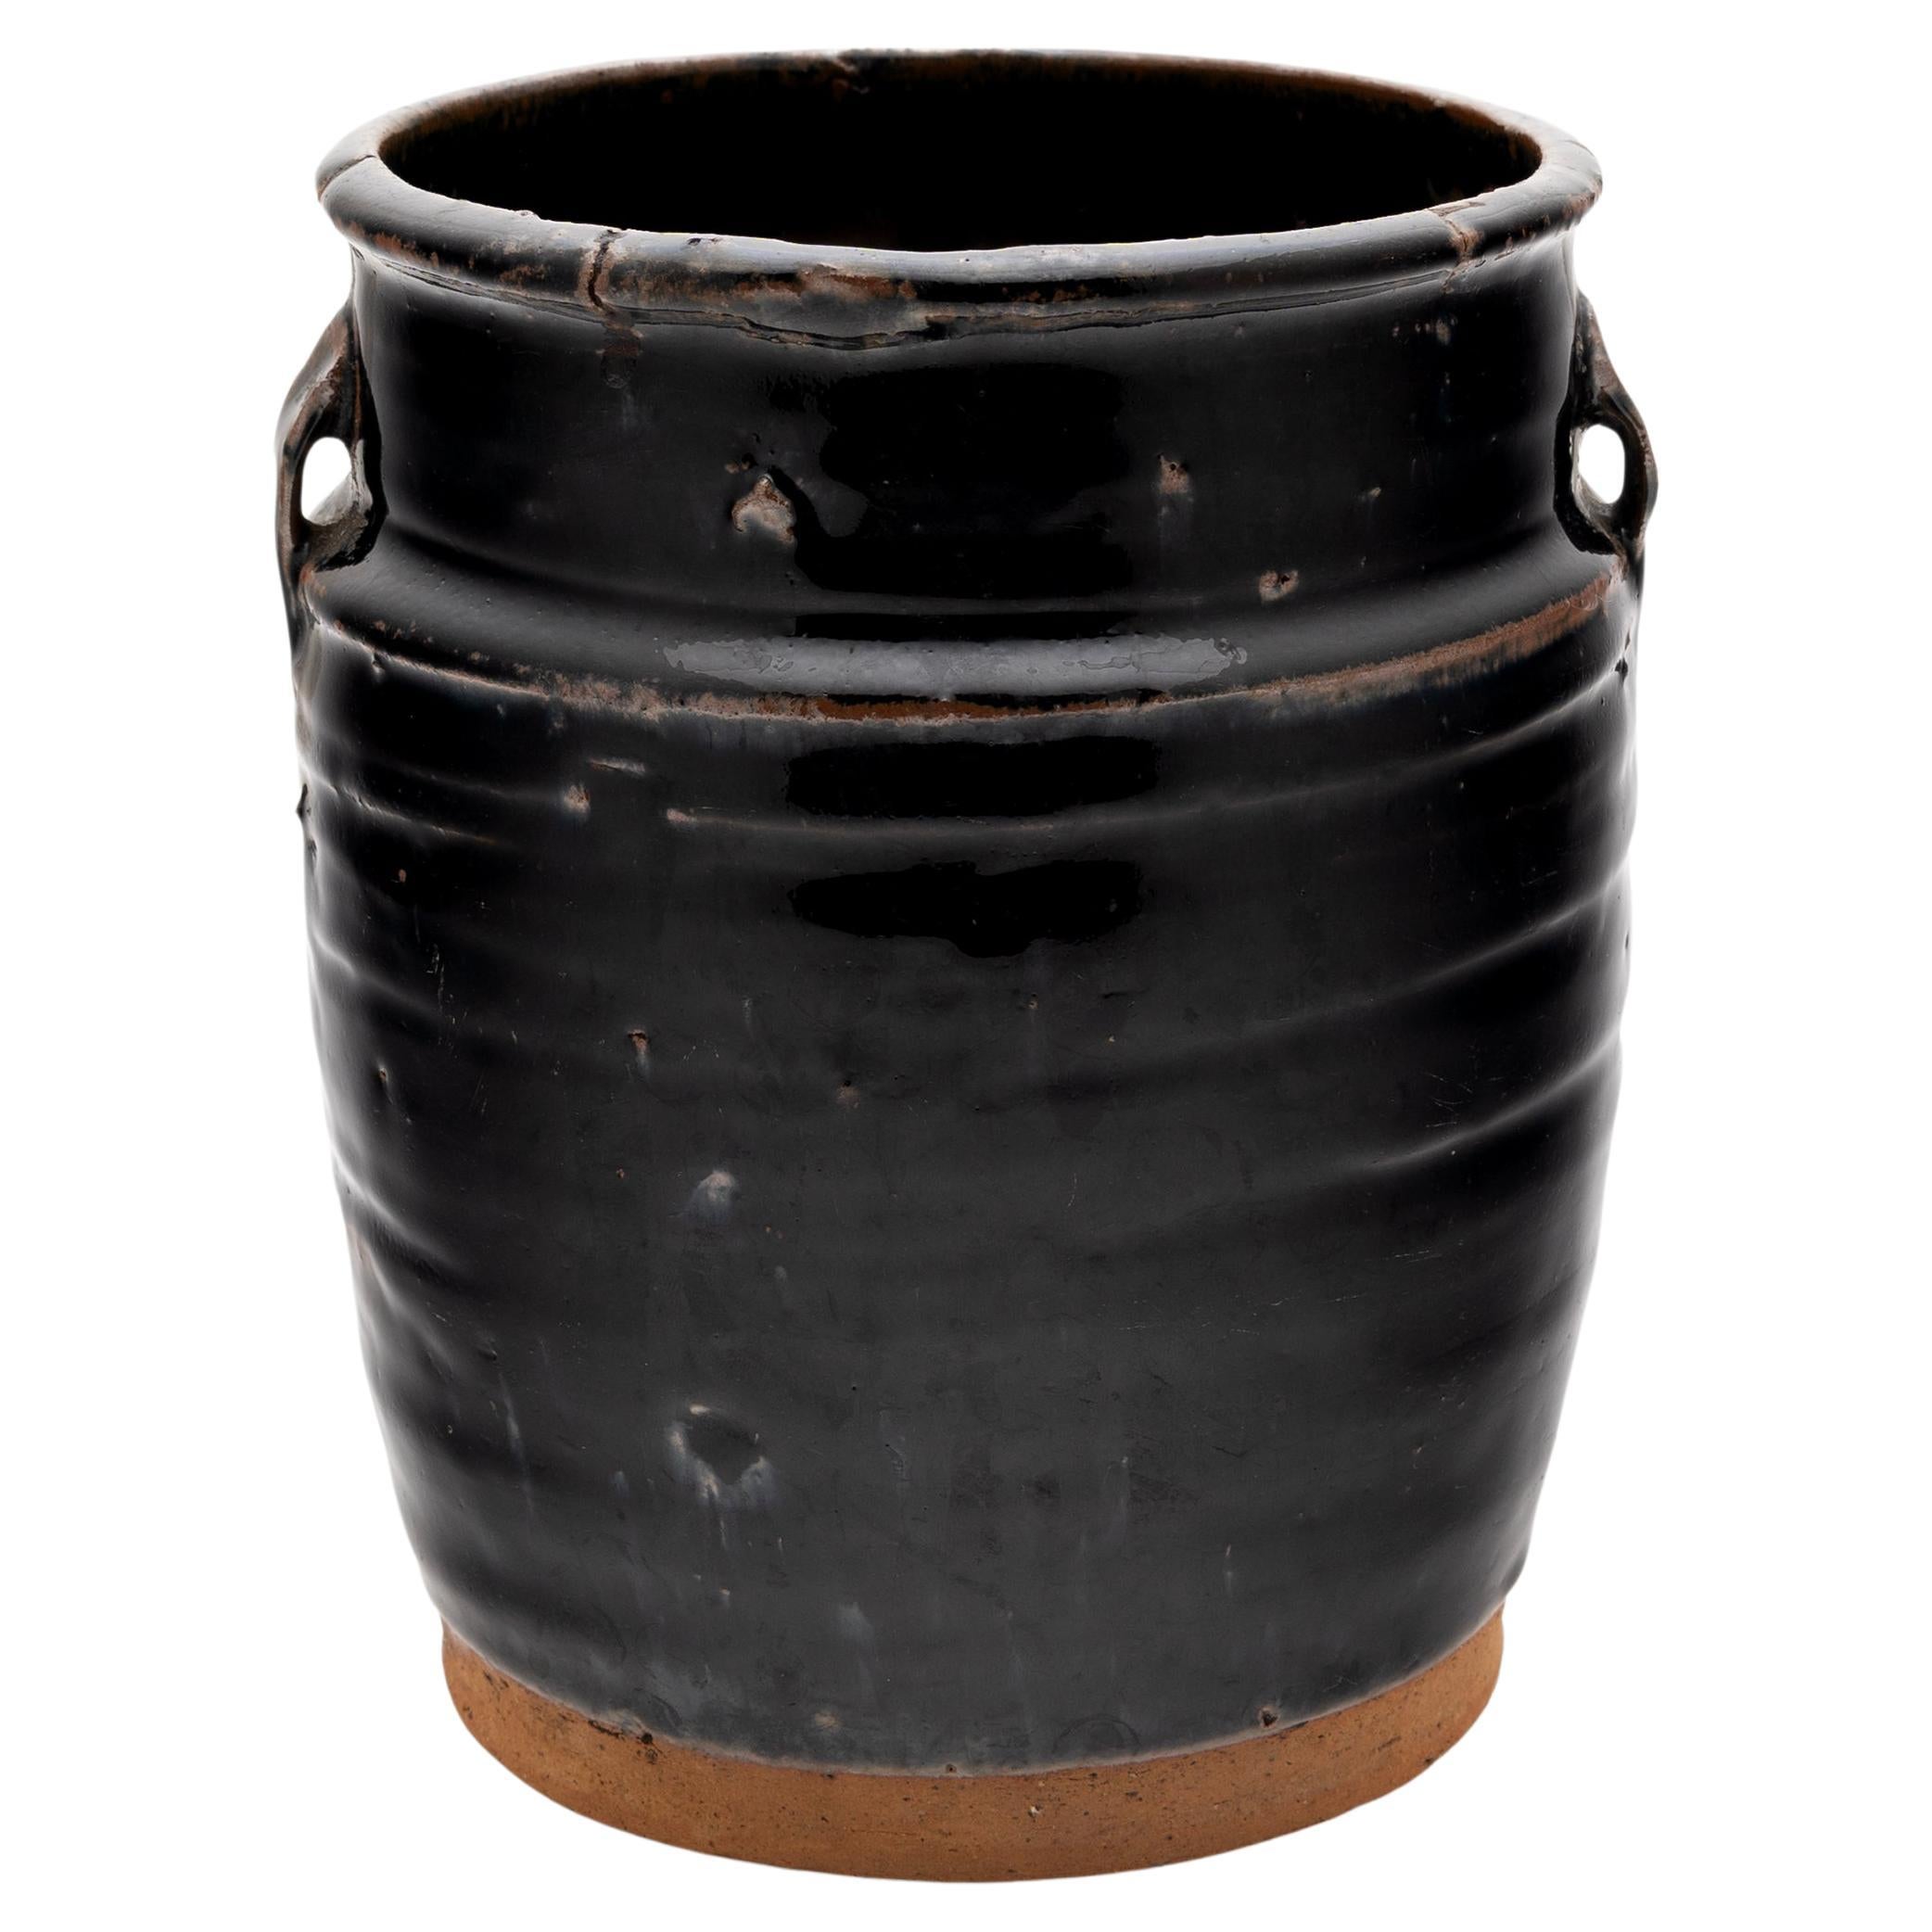 A cool, blue-black glaze coats the stout body of this early 20th-century terra cotta kitchen jar. As evidenced by the glazed interior, the wide-mouth jar was once used daily in a provincial Chinese kitchen for fermenting foods and condiments. The